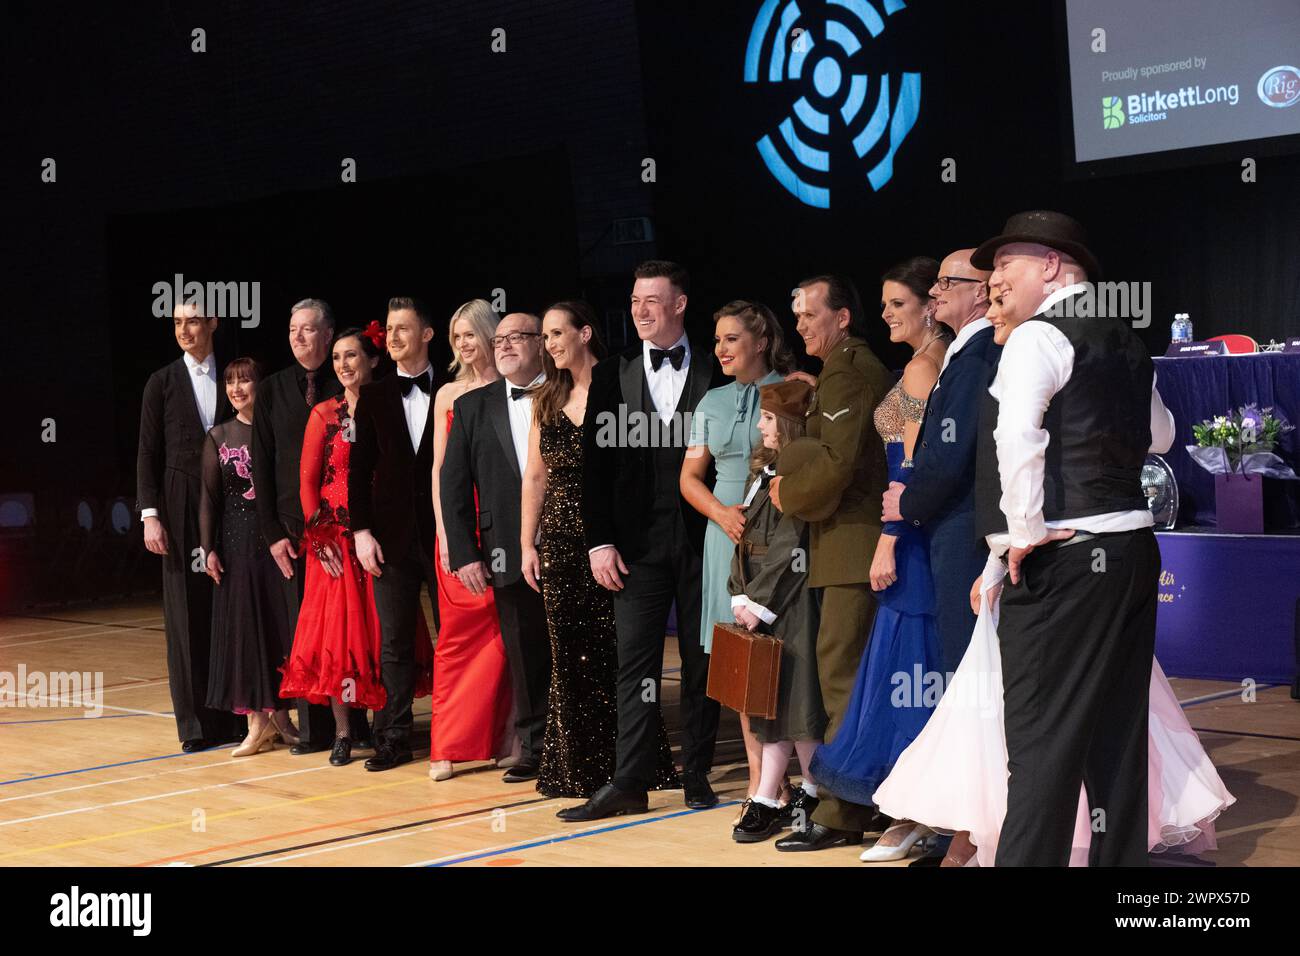 Brentwood Essex 9th Mar 2024 Strictly Air Ambulance fund raising event at the Brentwood Centre, Brentwood Essex. The show features Lisa Snowdon and professional dancers from the BBC's Strictly Come Dancing. Credit: Ian Davidson/Alamy Live News Stock Photo